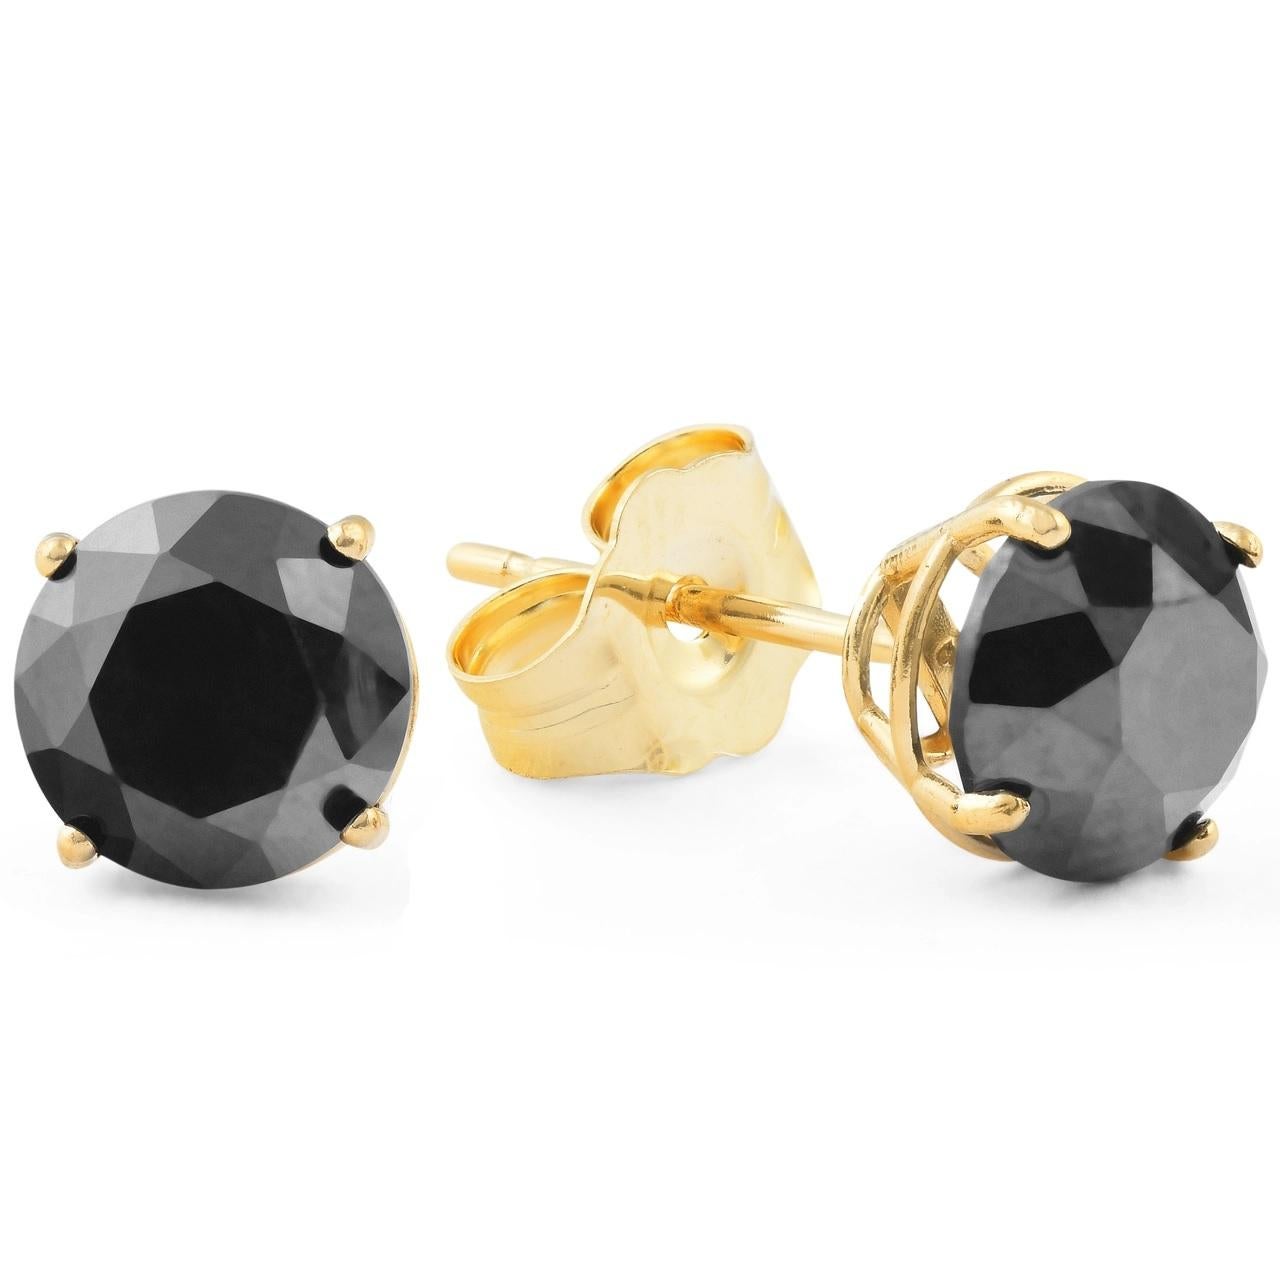 Make a daring statement with these spectacular diamond solitaire earrings. Crafted in 14K yellow gold, each earring showcases an alluring 4.7 mm mm natural round black diamond of in a four-prong setting. Impressive with 0.88 carat total weight of